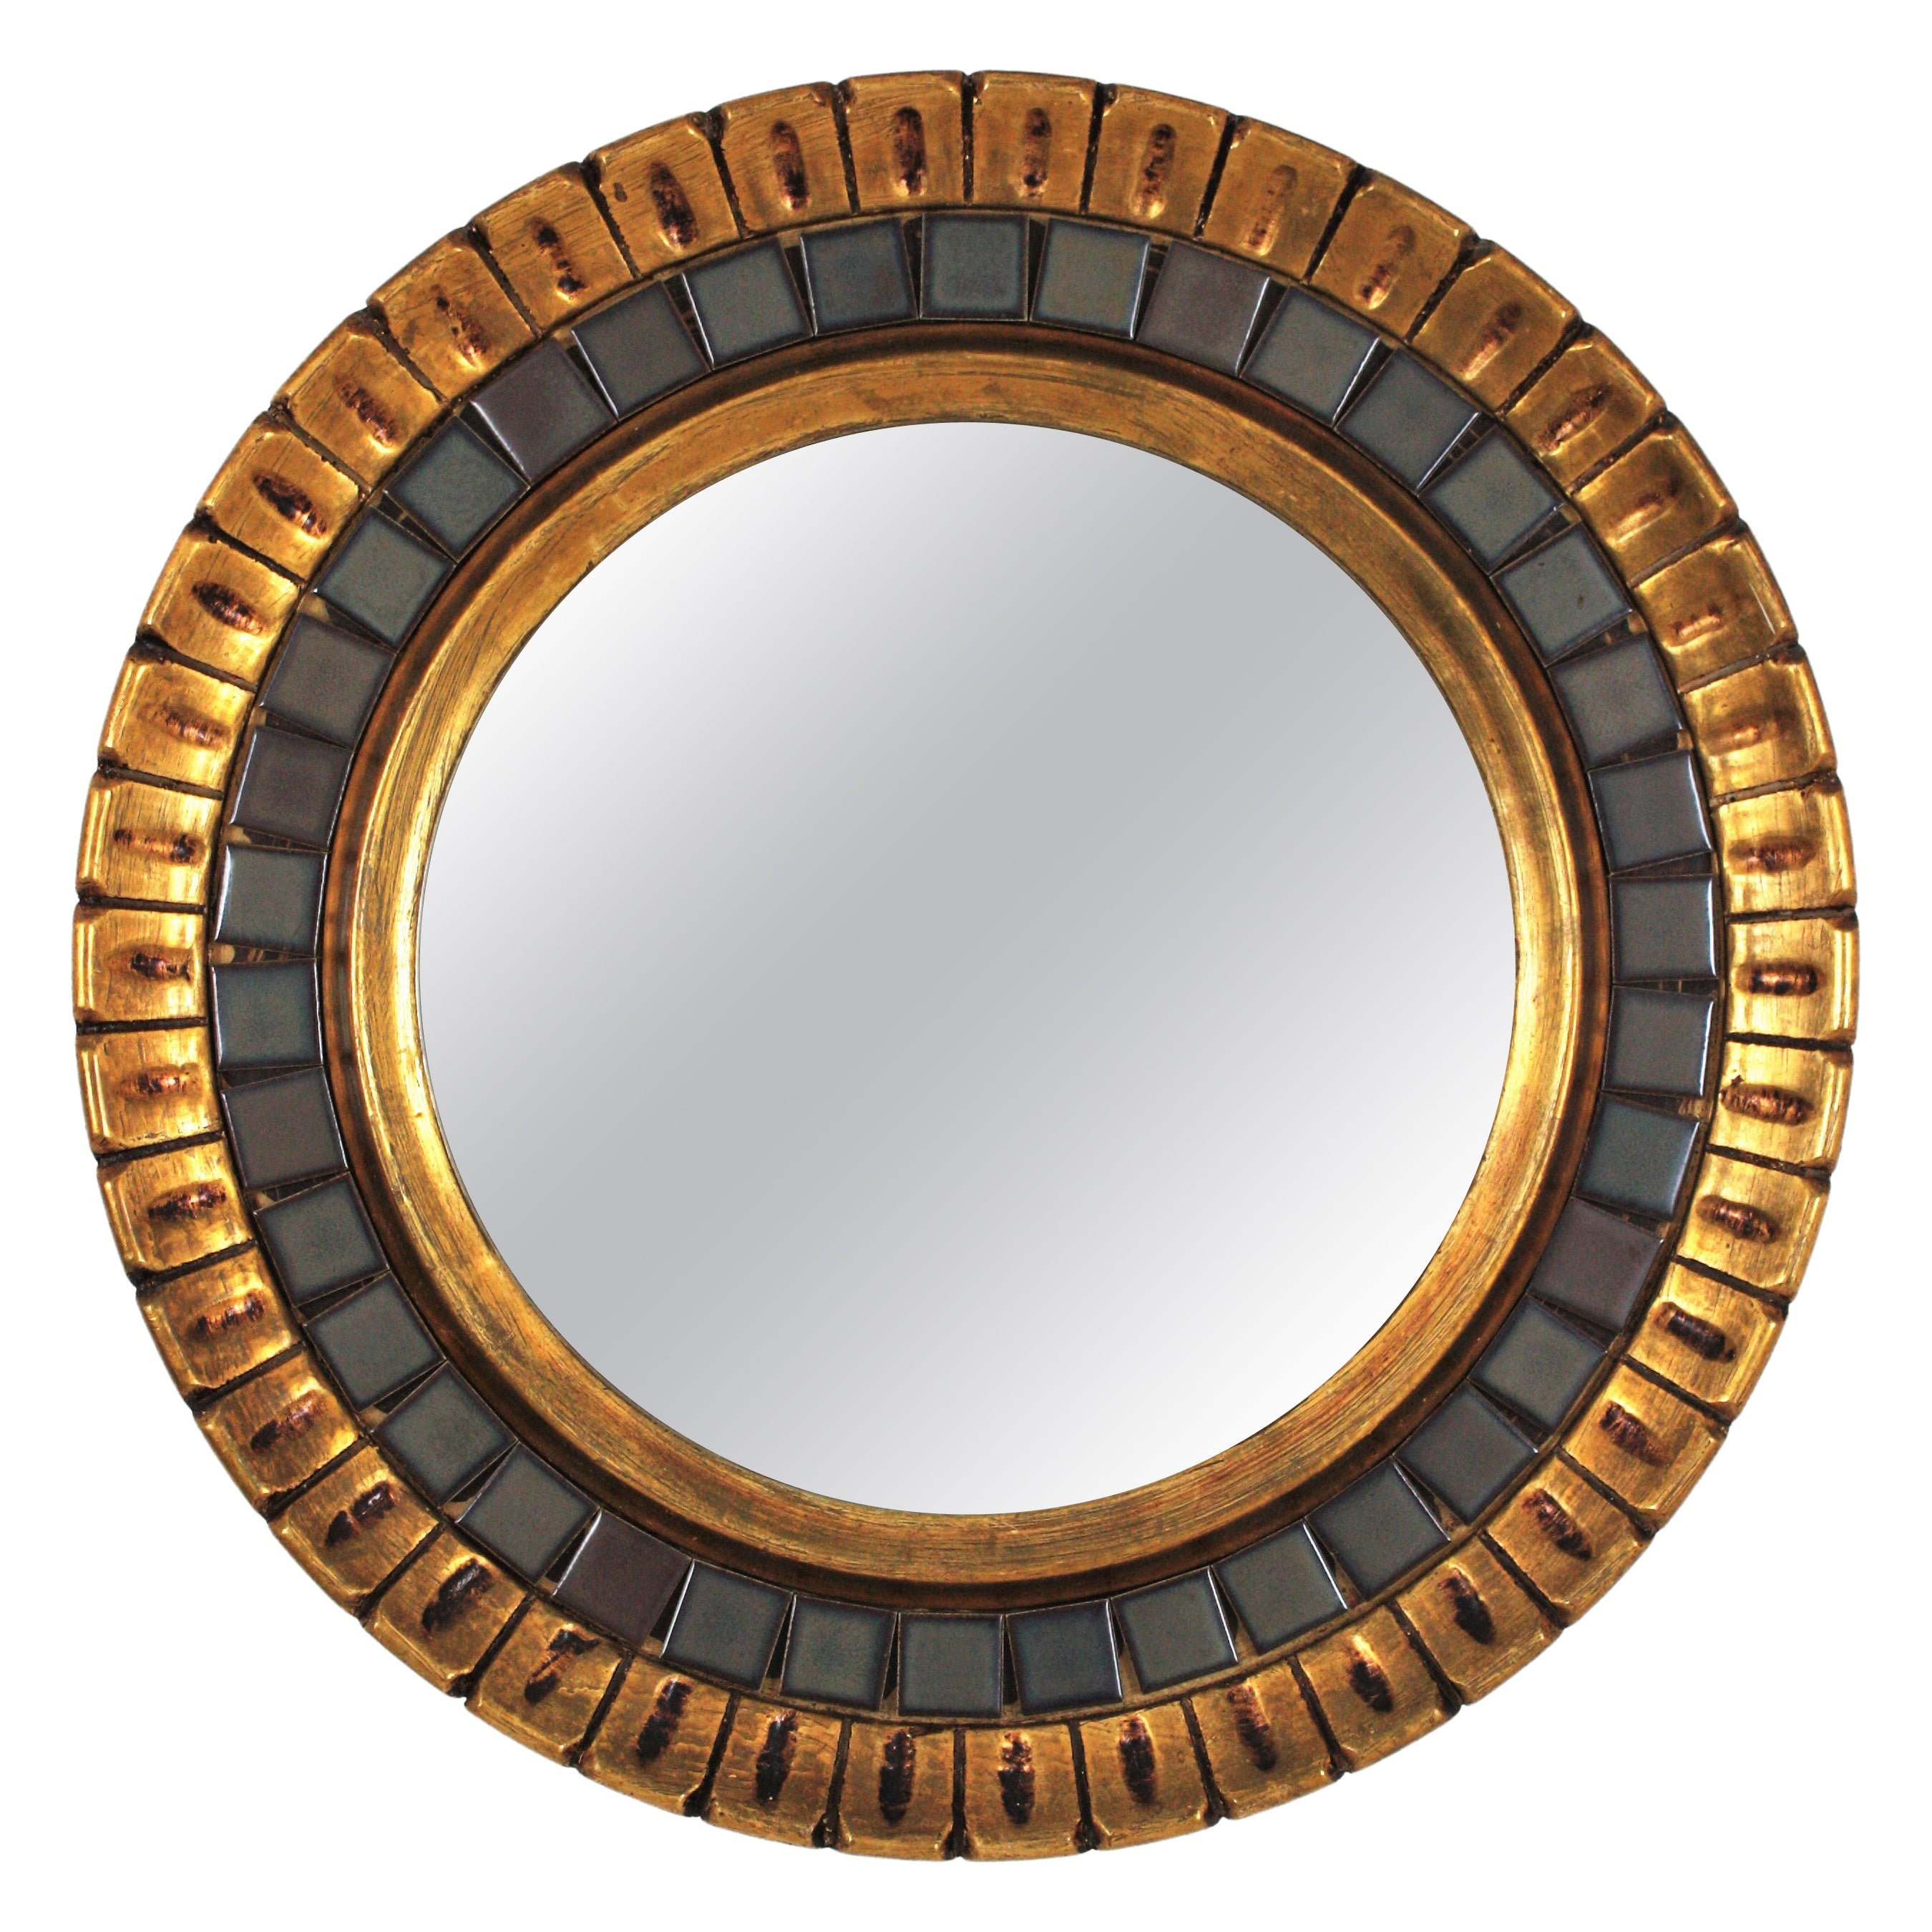 Midcentury Round Mirror, Giltwood and Ceramic For Sale